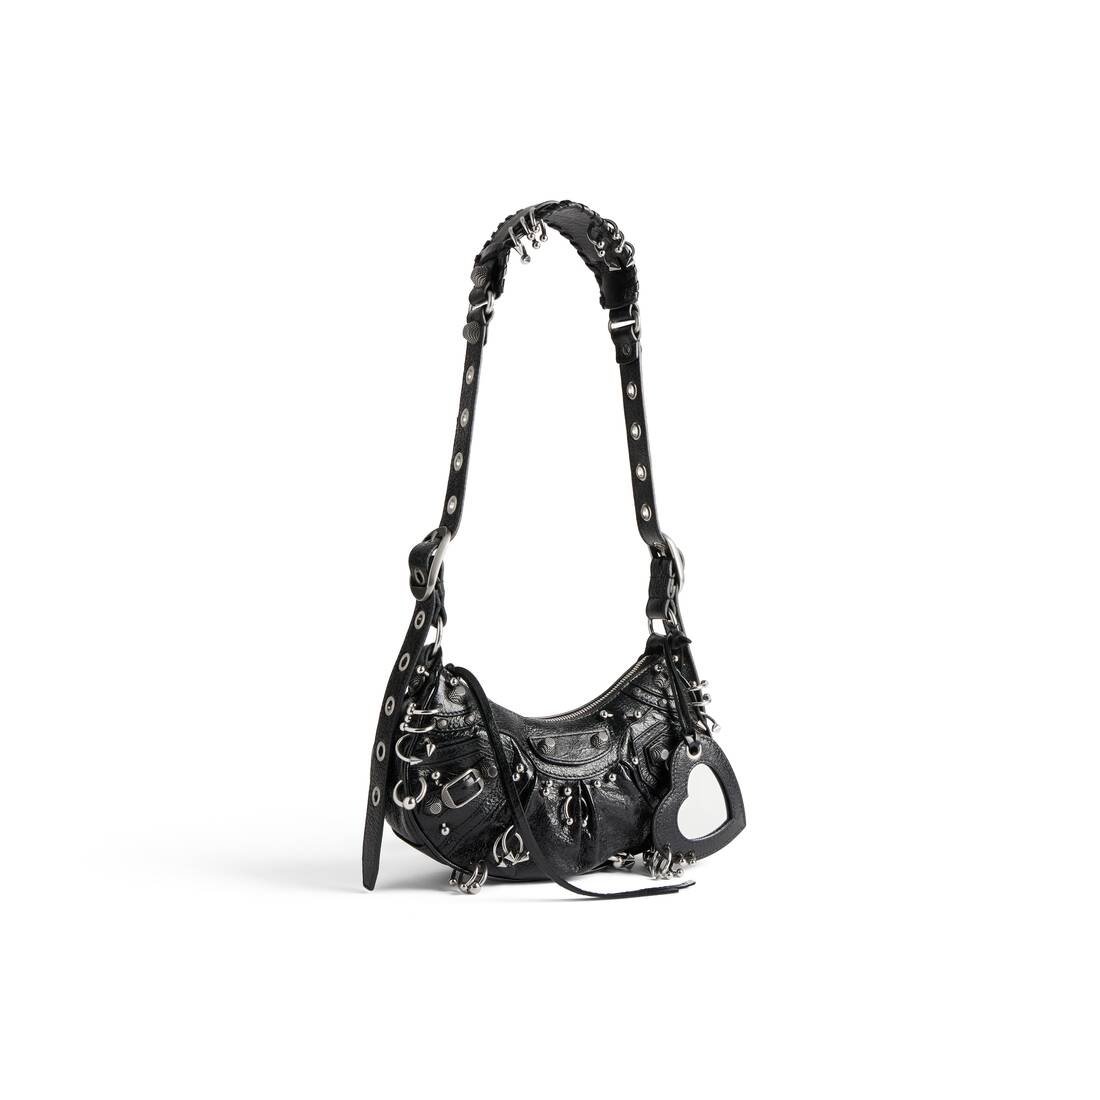 Le Cagole by Balenciaga is the itbag of the moment